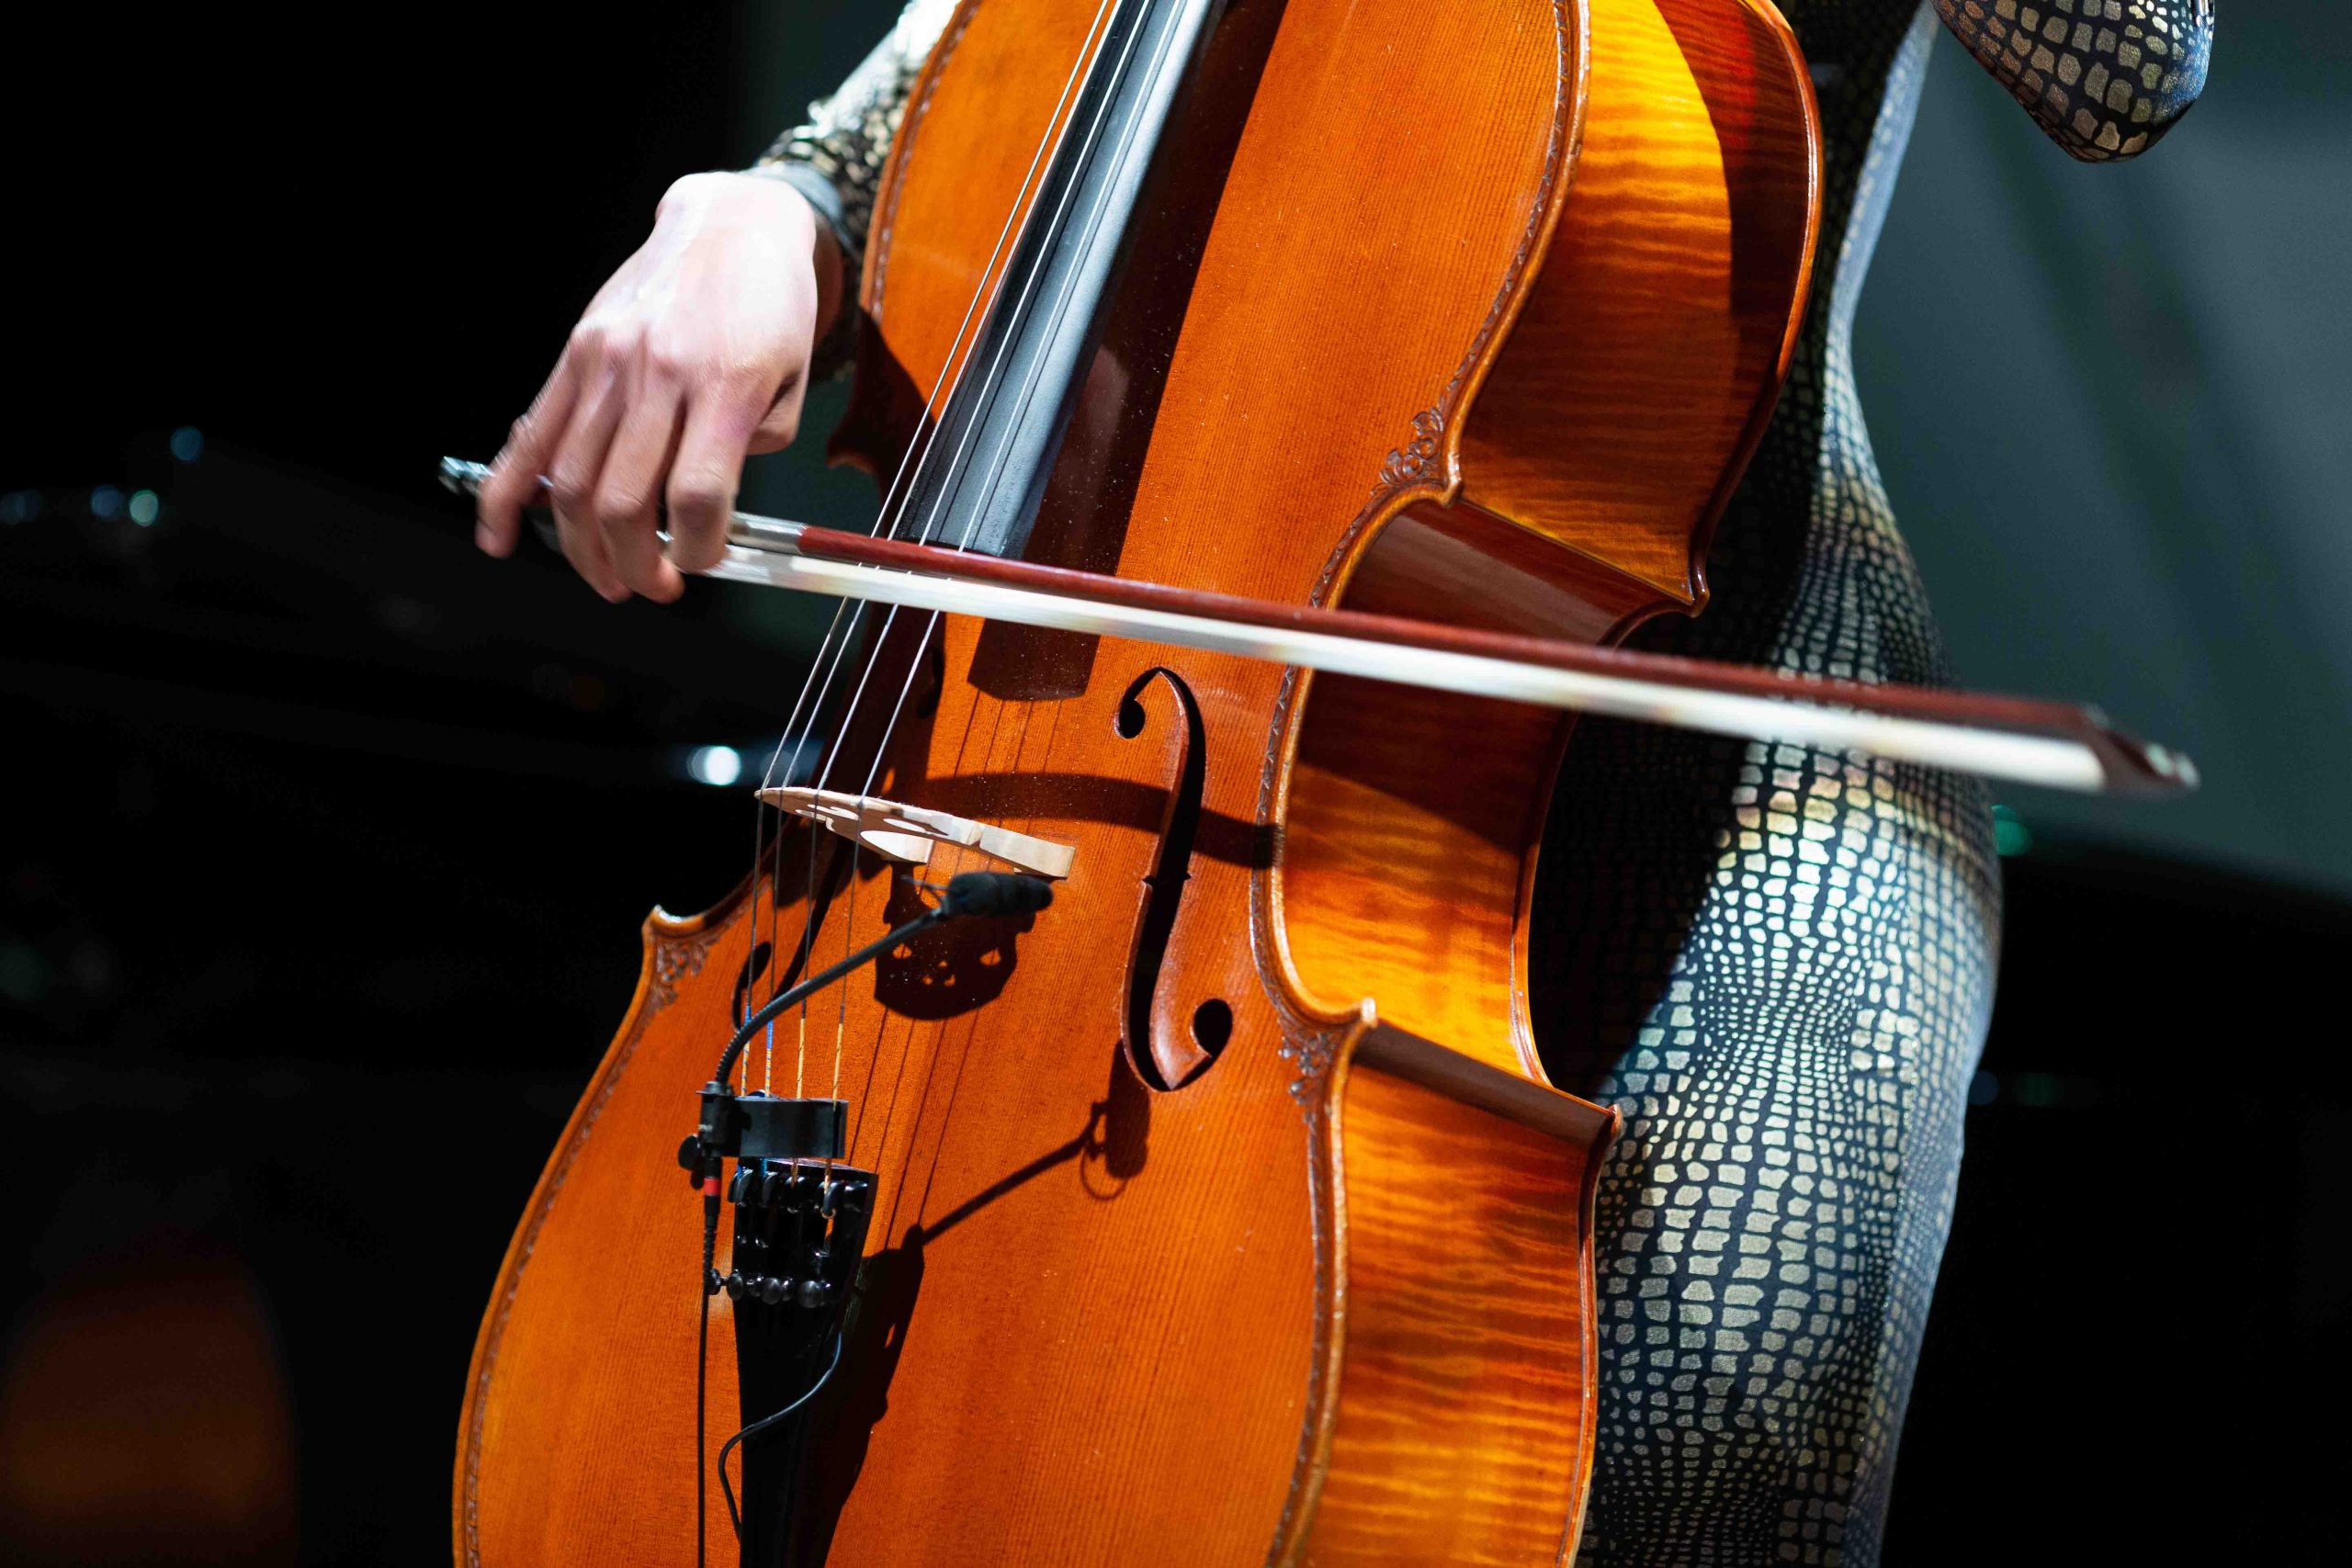 A close up of a hand playing a cello in the dark.